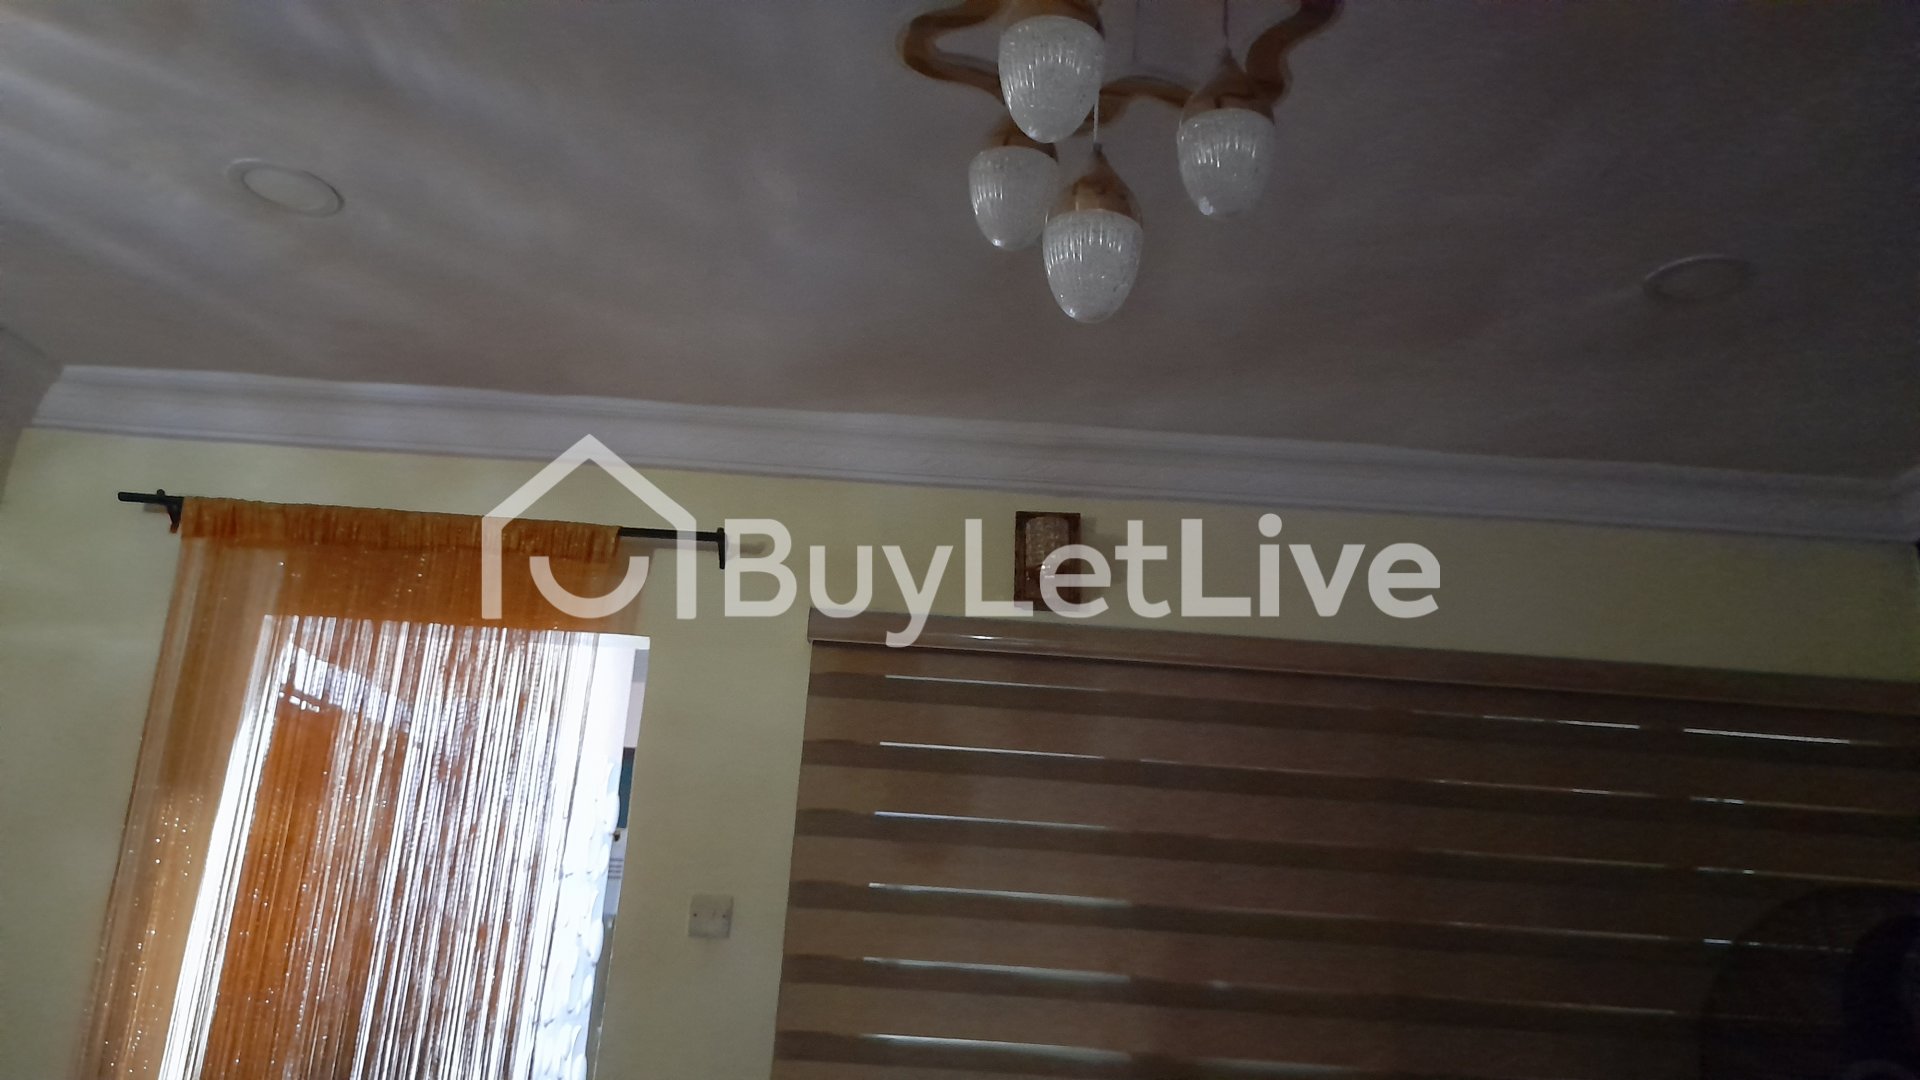 3 bedrooms Detached Bungalow for rent at Egbeda